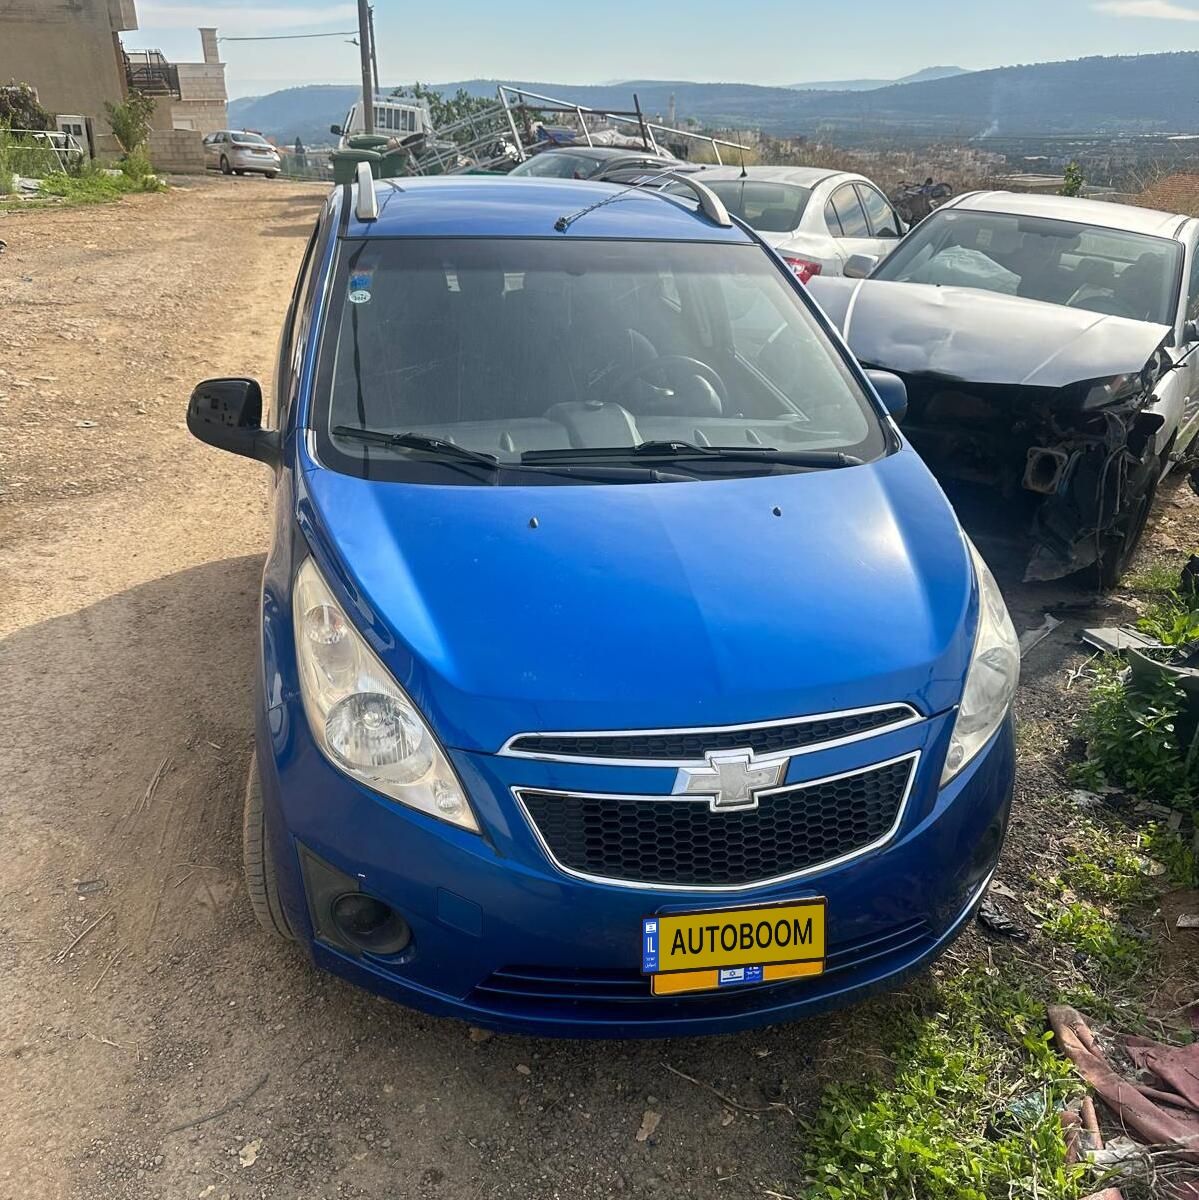 Chevrolet Spark 2nd hand, 2011, private hand